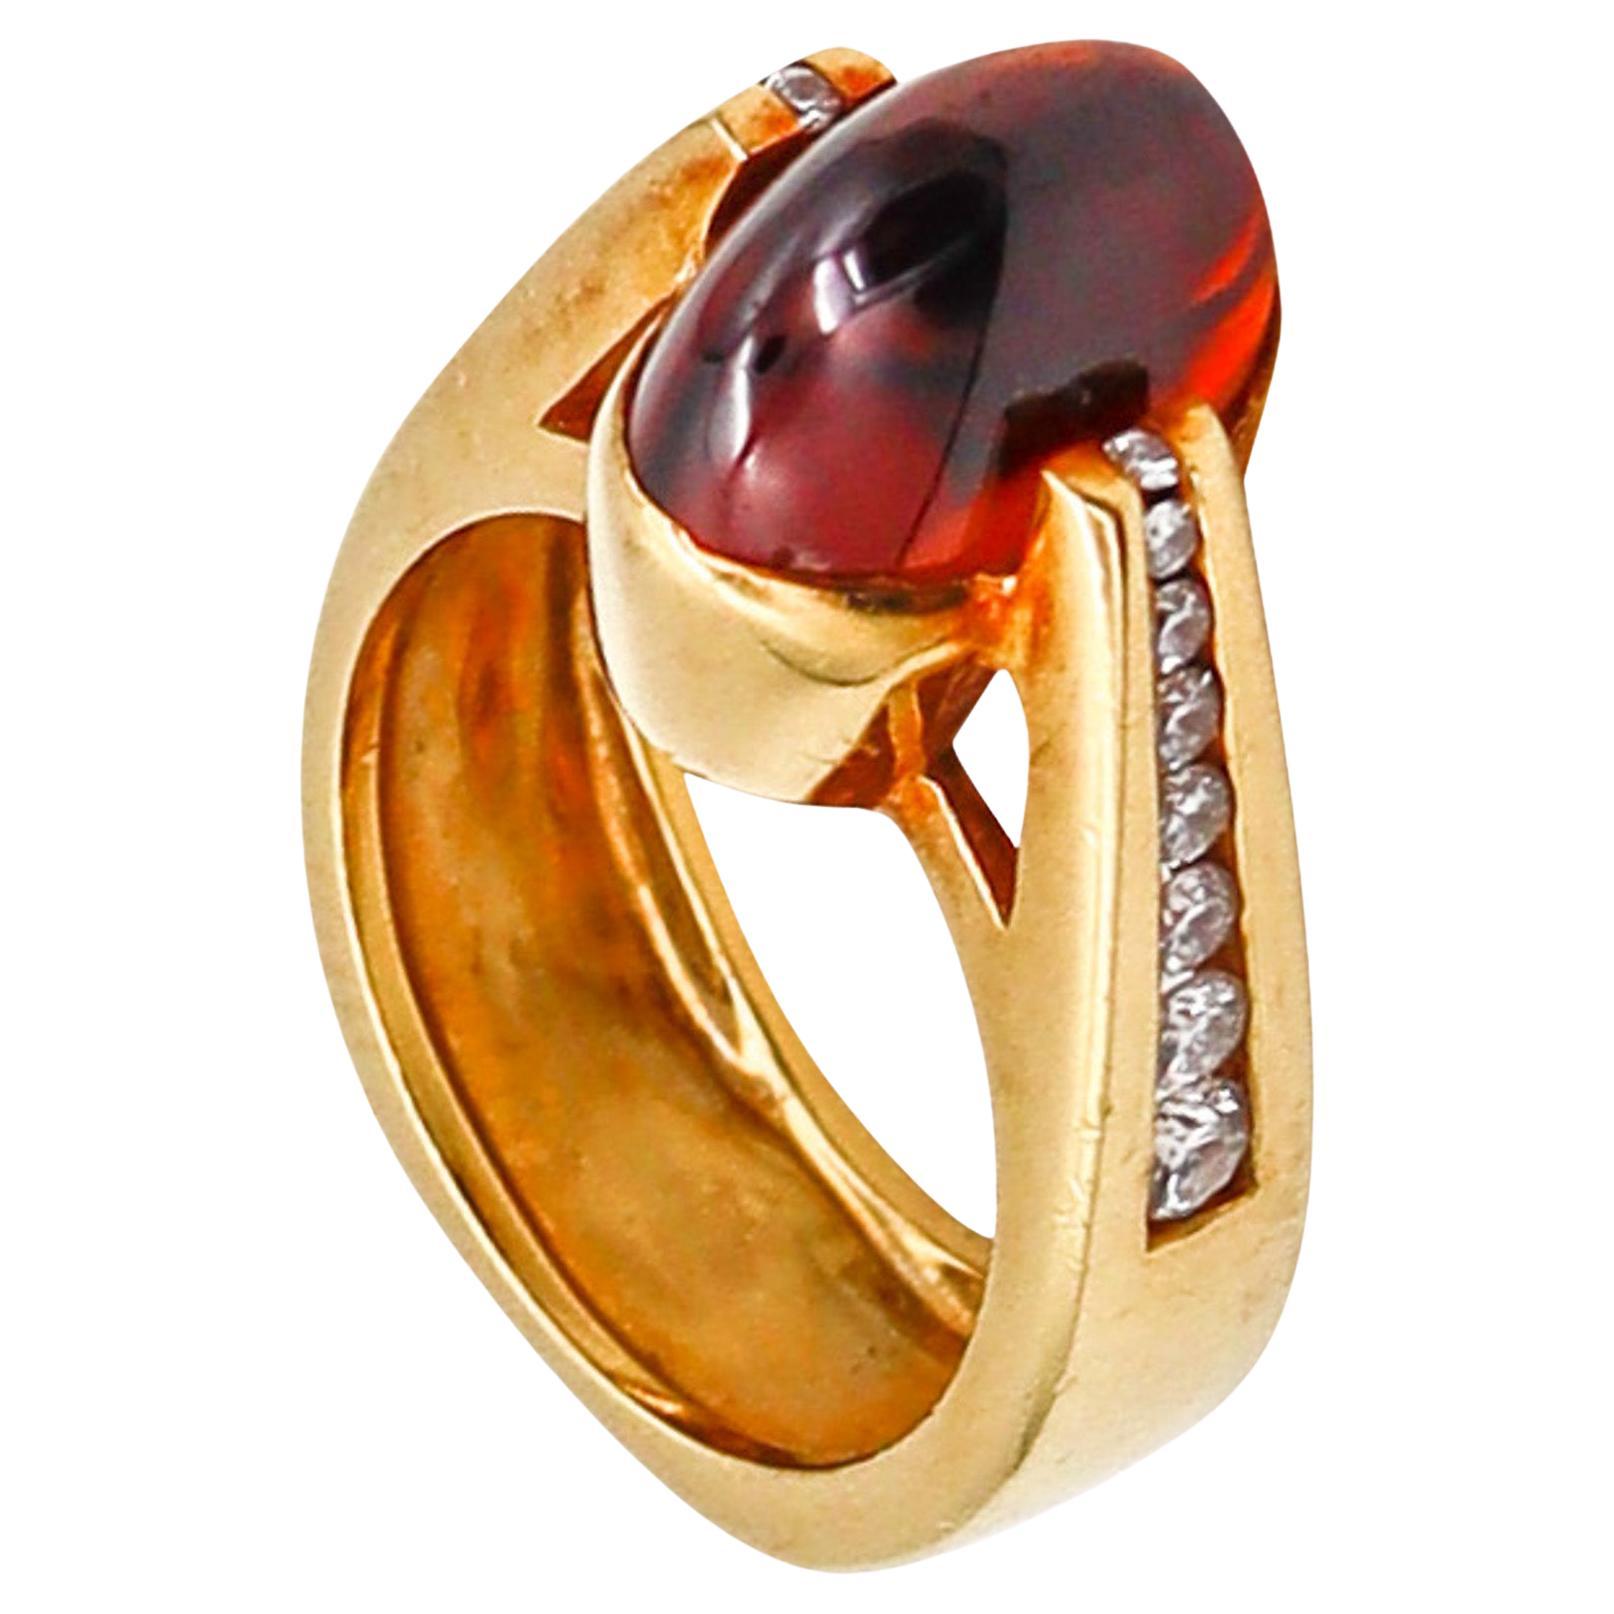 Designer Cocktail Ring in 18kt Gold with 5.45 Ctw in Diamonds & Madeira Citrine